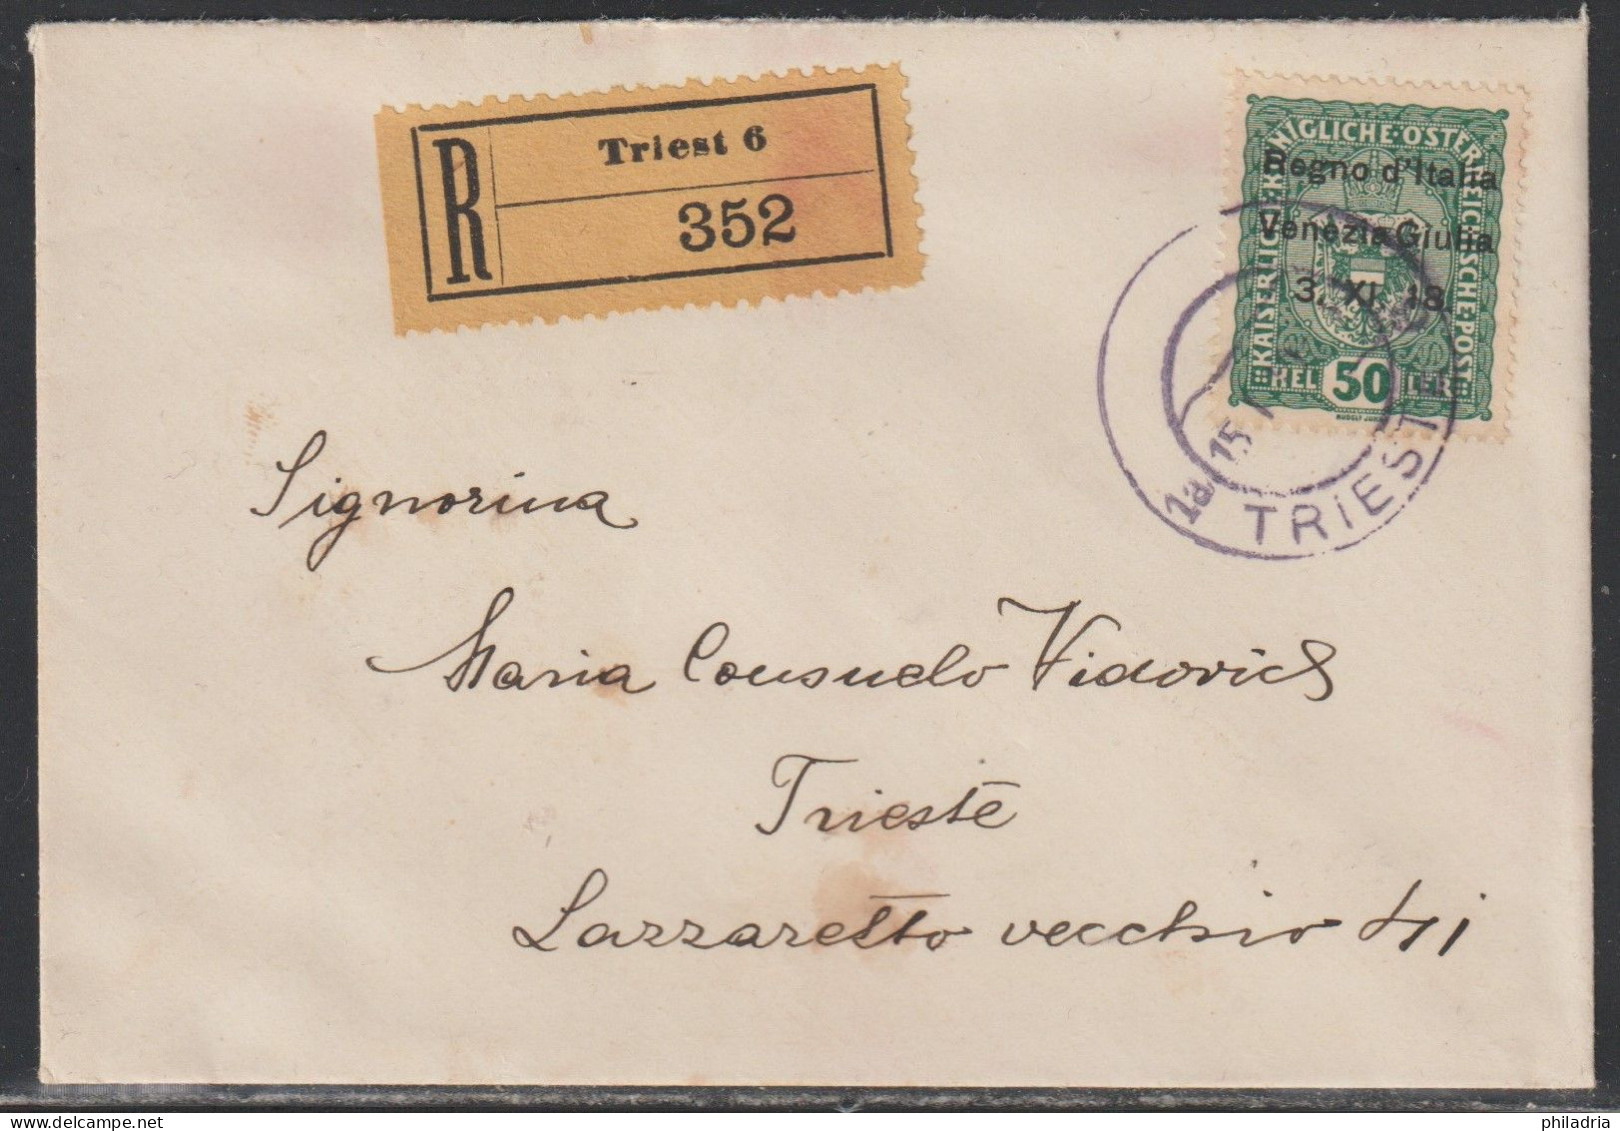 Triest 6, 1919, Registered Cover Franked With 50 Cent. - Vénétie Julienne